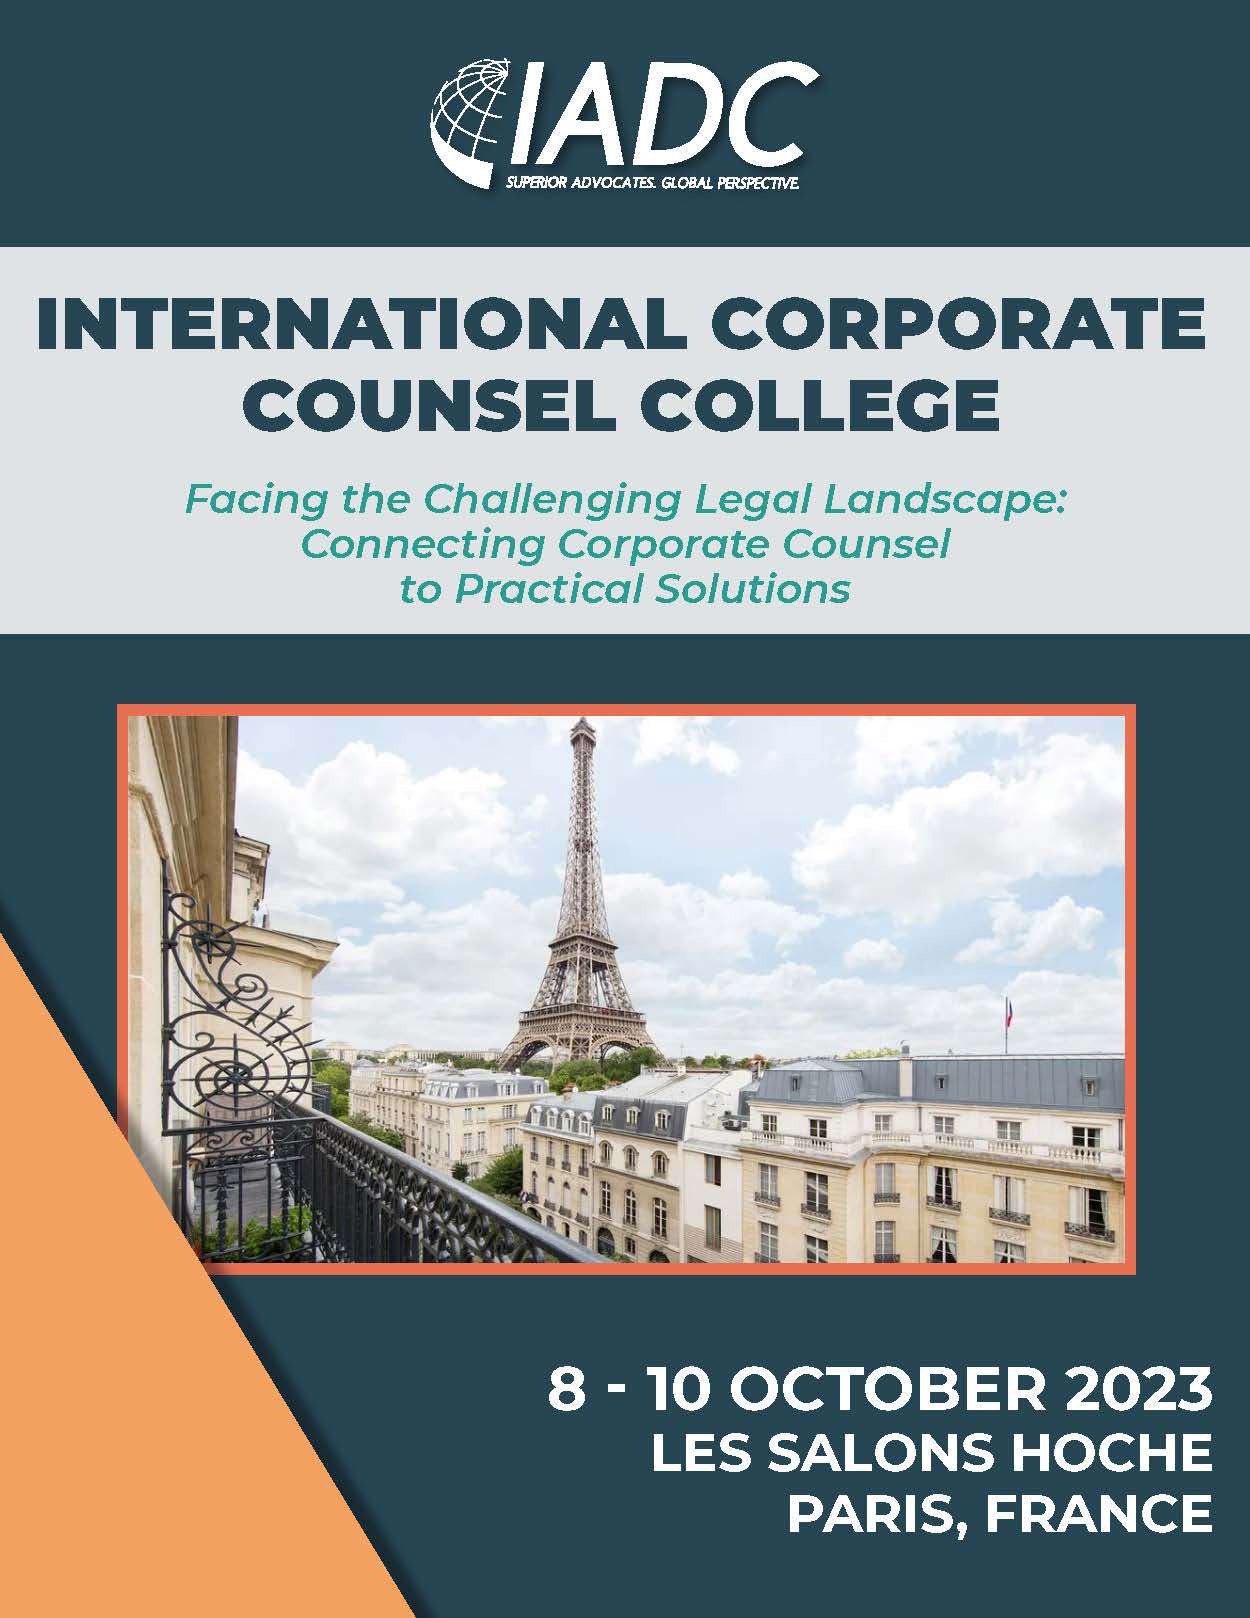 2023 International Corporate Counsel College